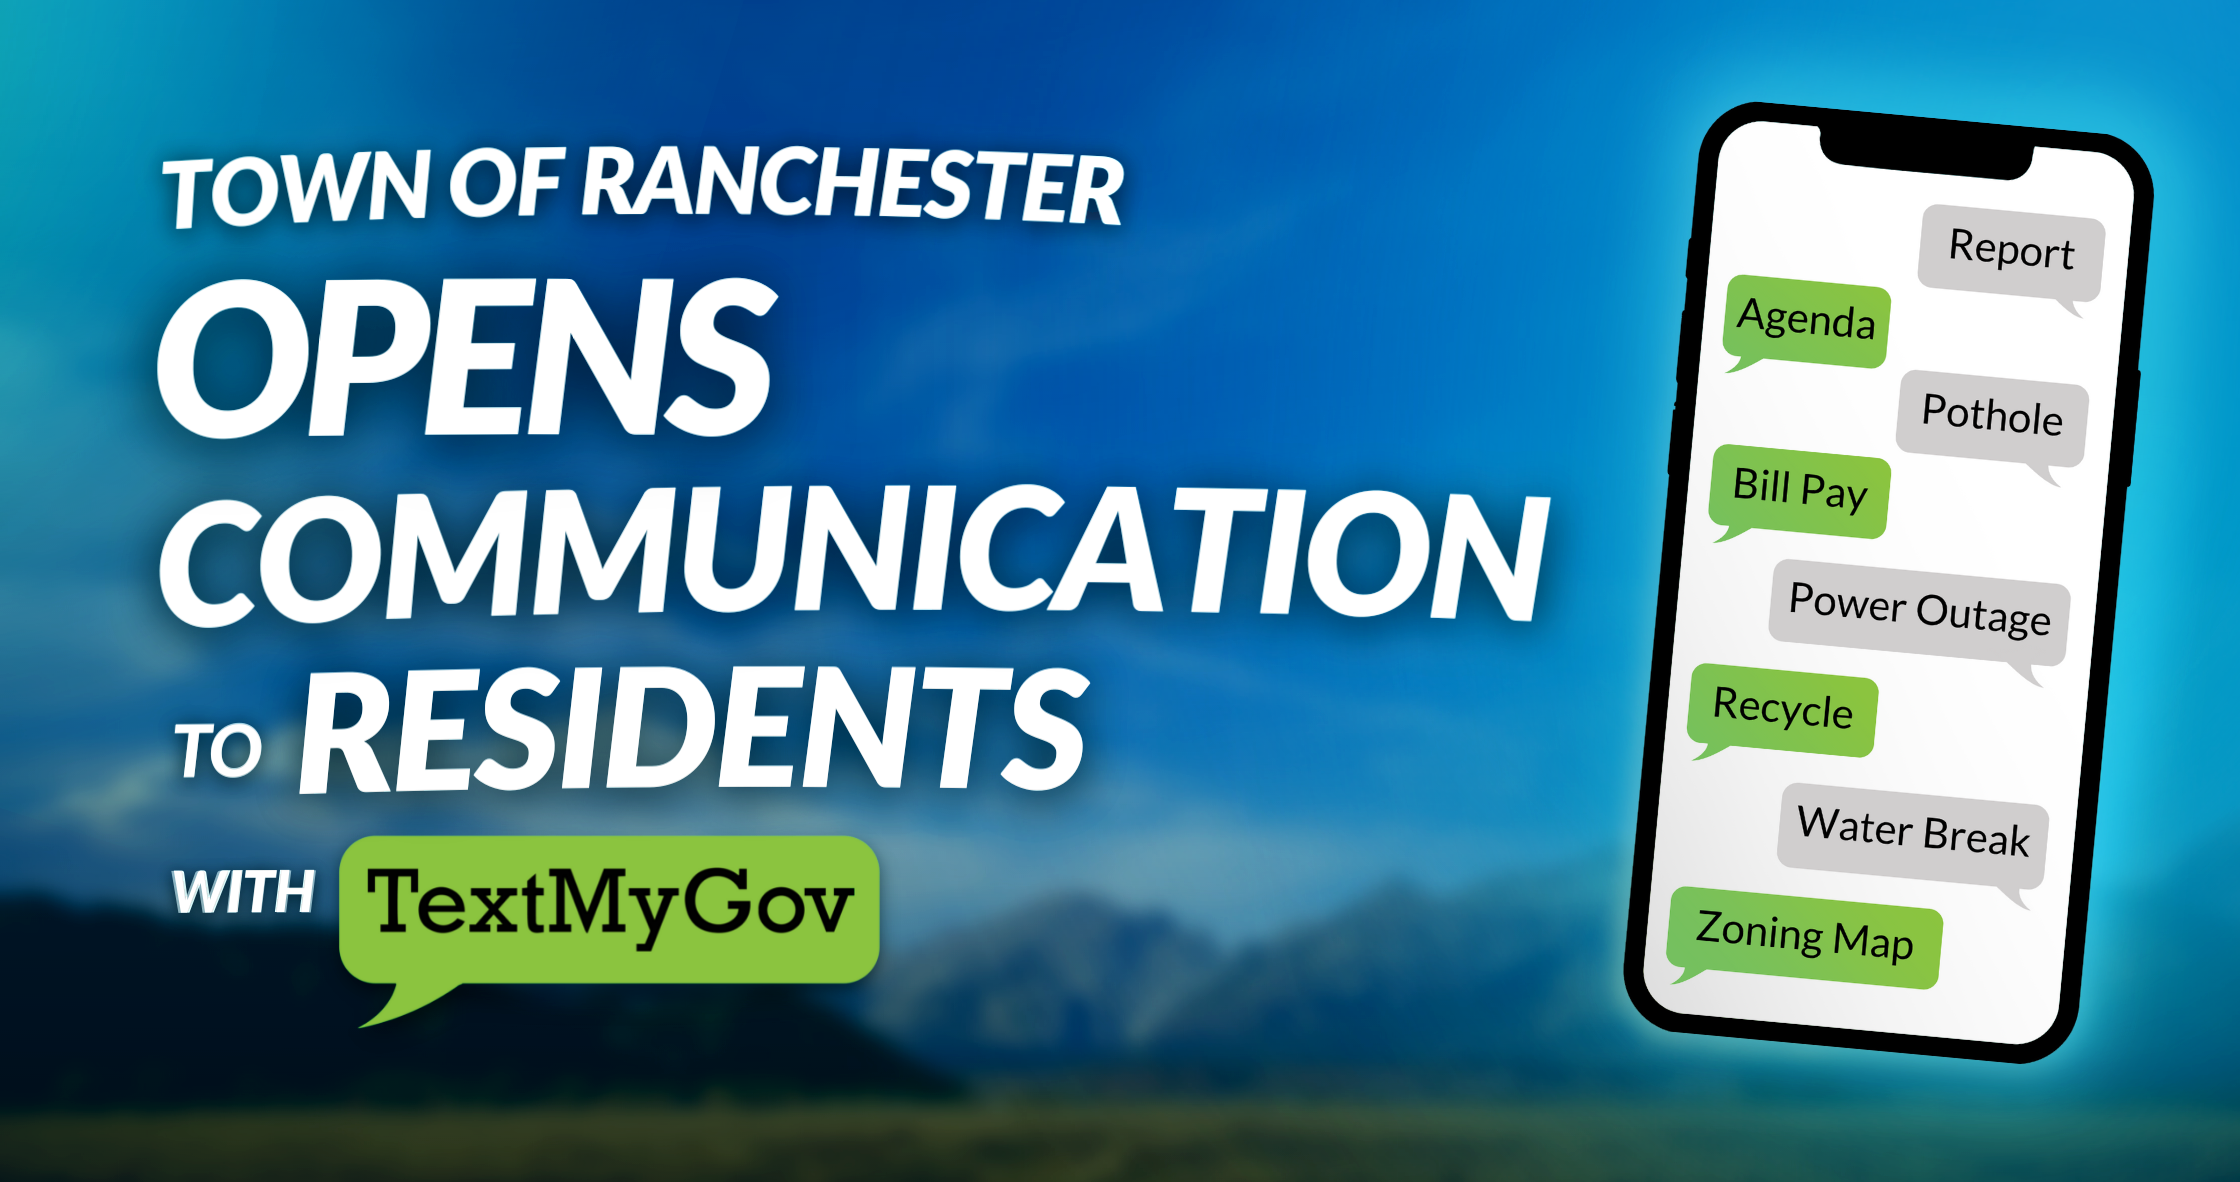 Featured image for “Town of Ranchester opens communication to residents with TextMyGov”